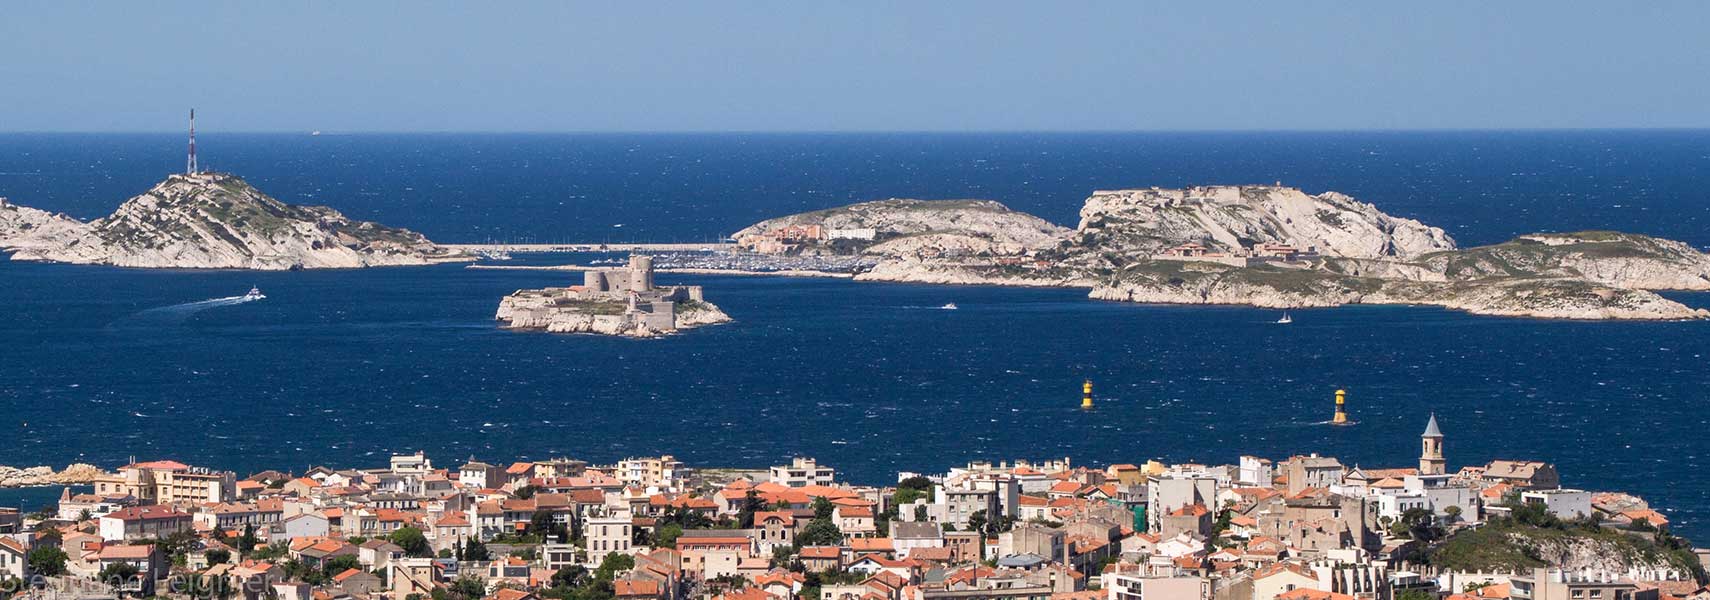 Chateau d'If and neighboring offshore islands, Marseille, France